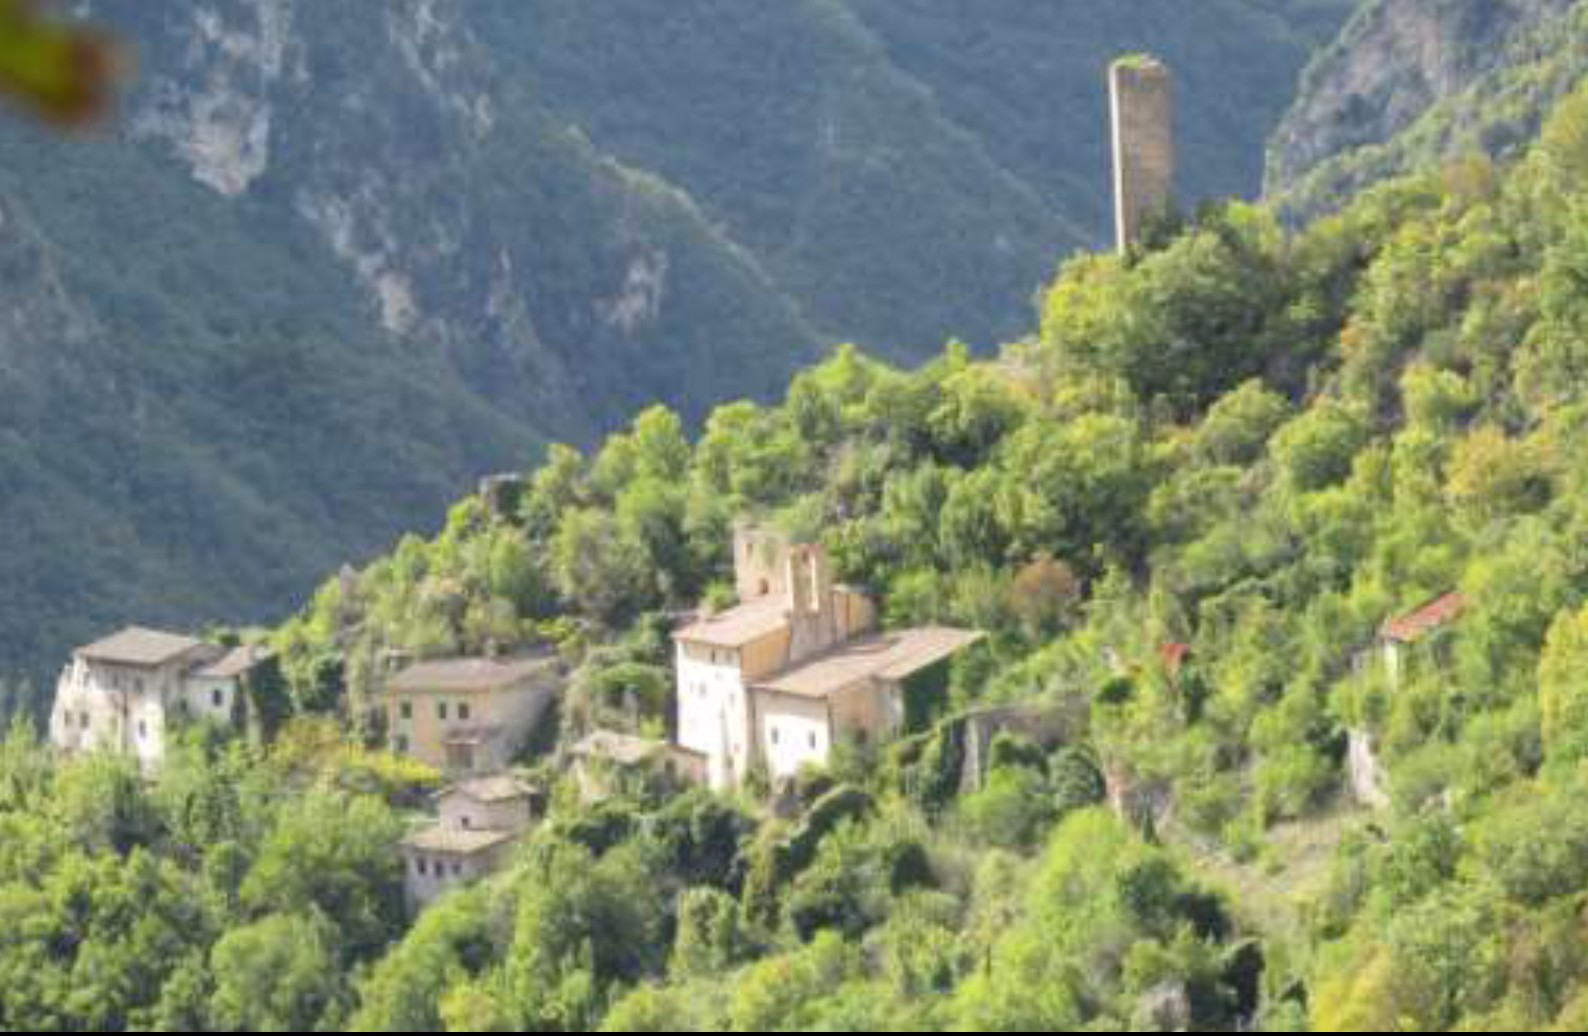 Hidden Umbria: the Corno valley, between hermitages and ghost villages